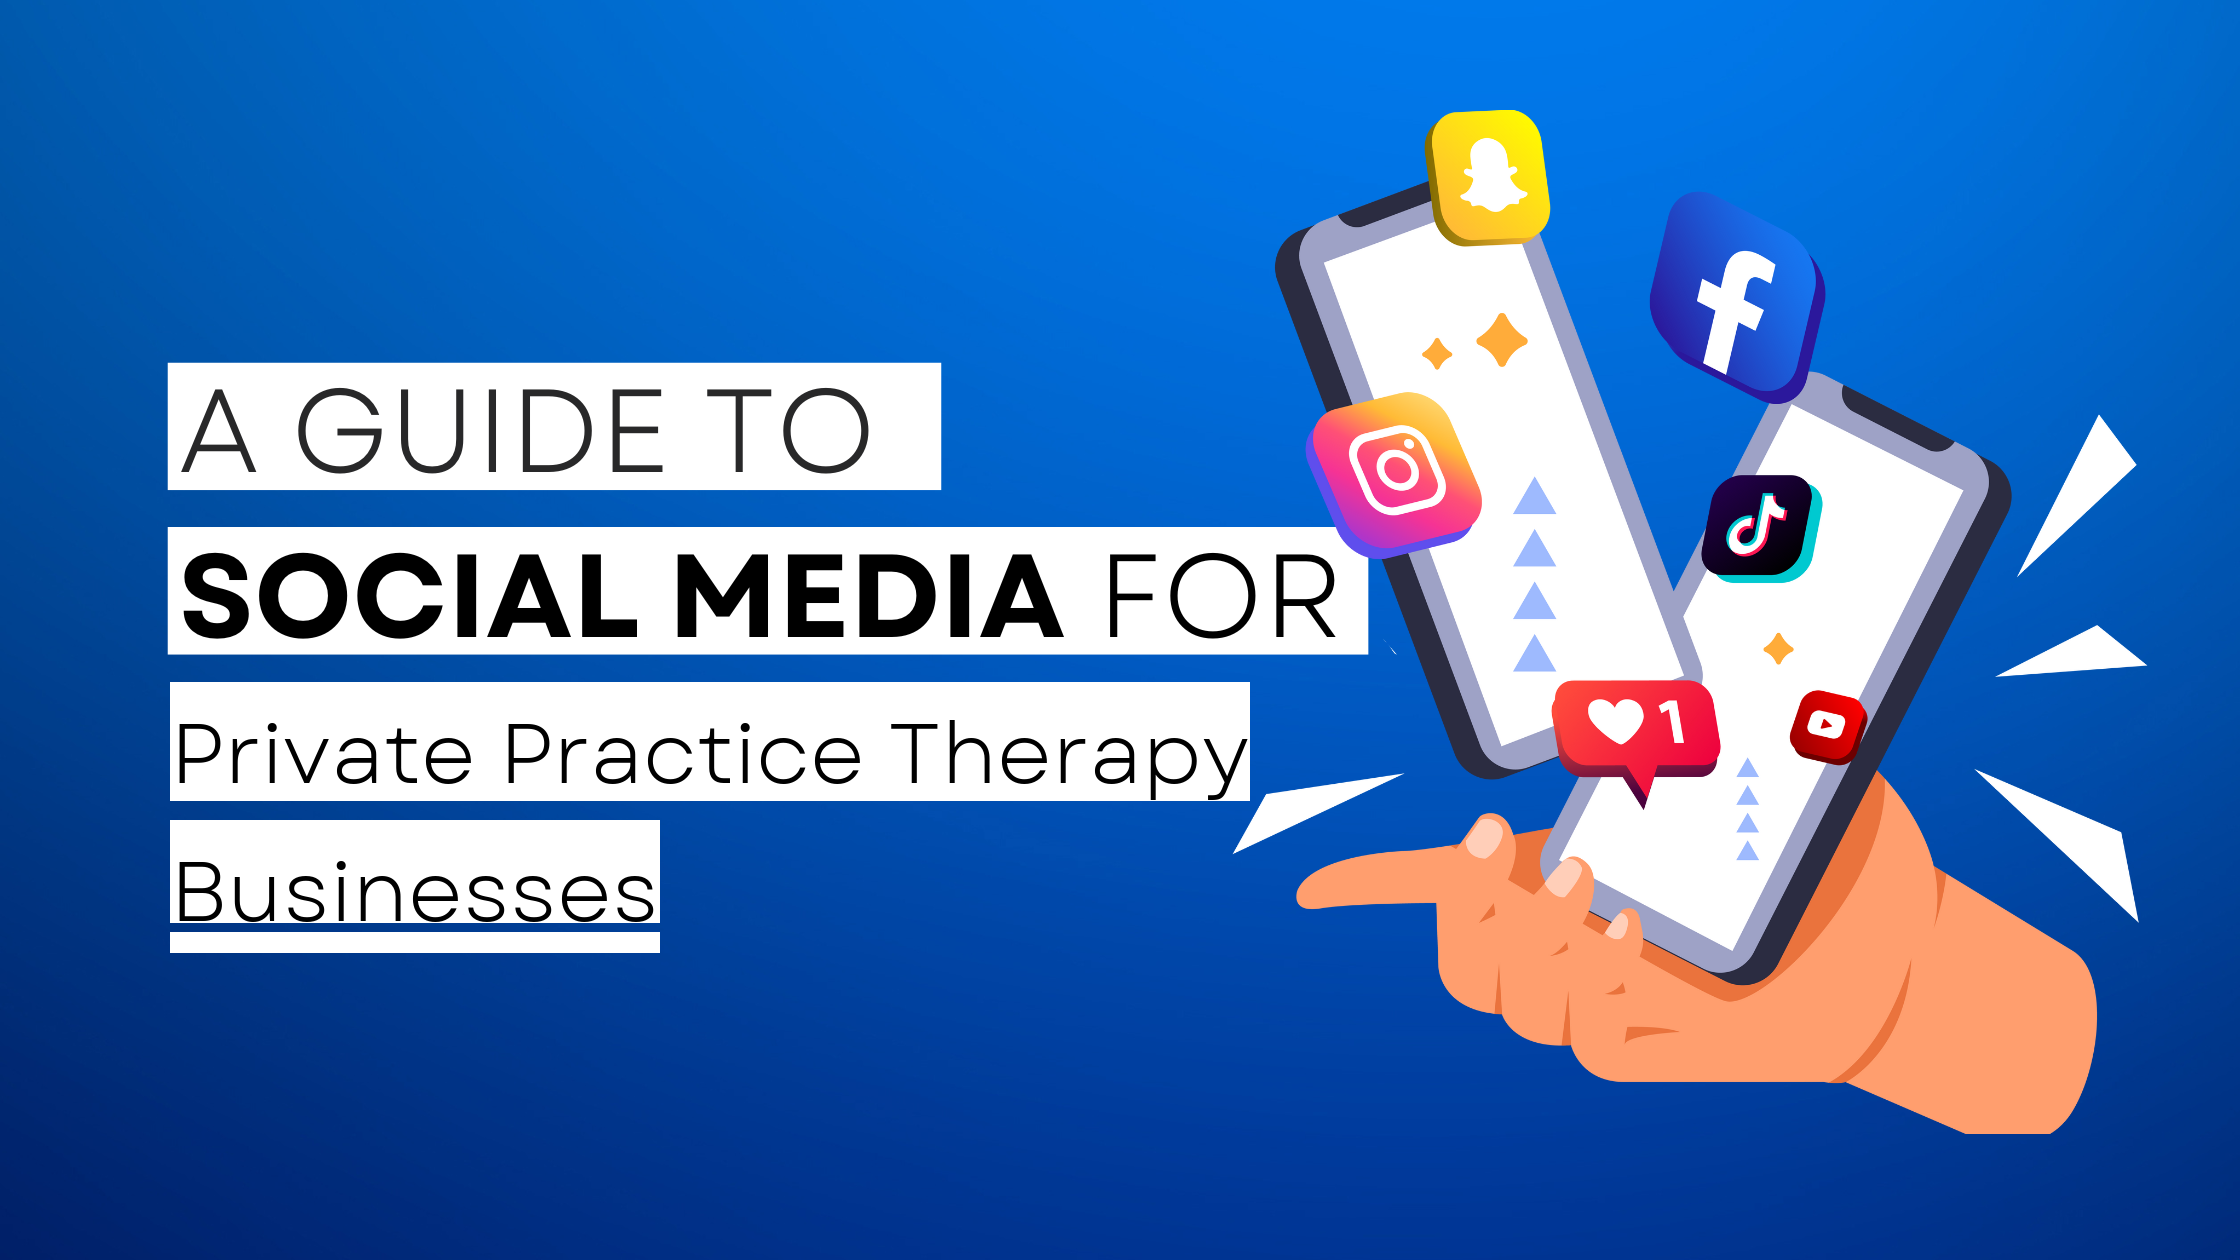 How to start Private Practice Therapy on social media